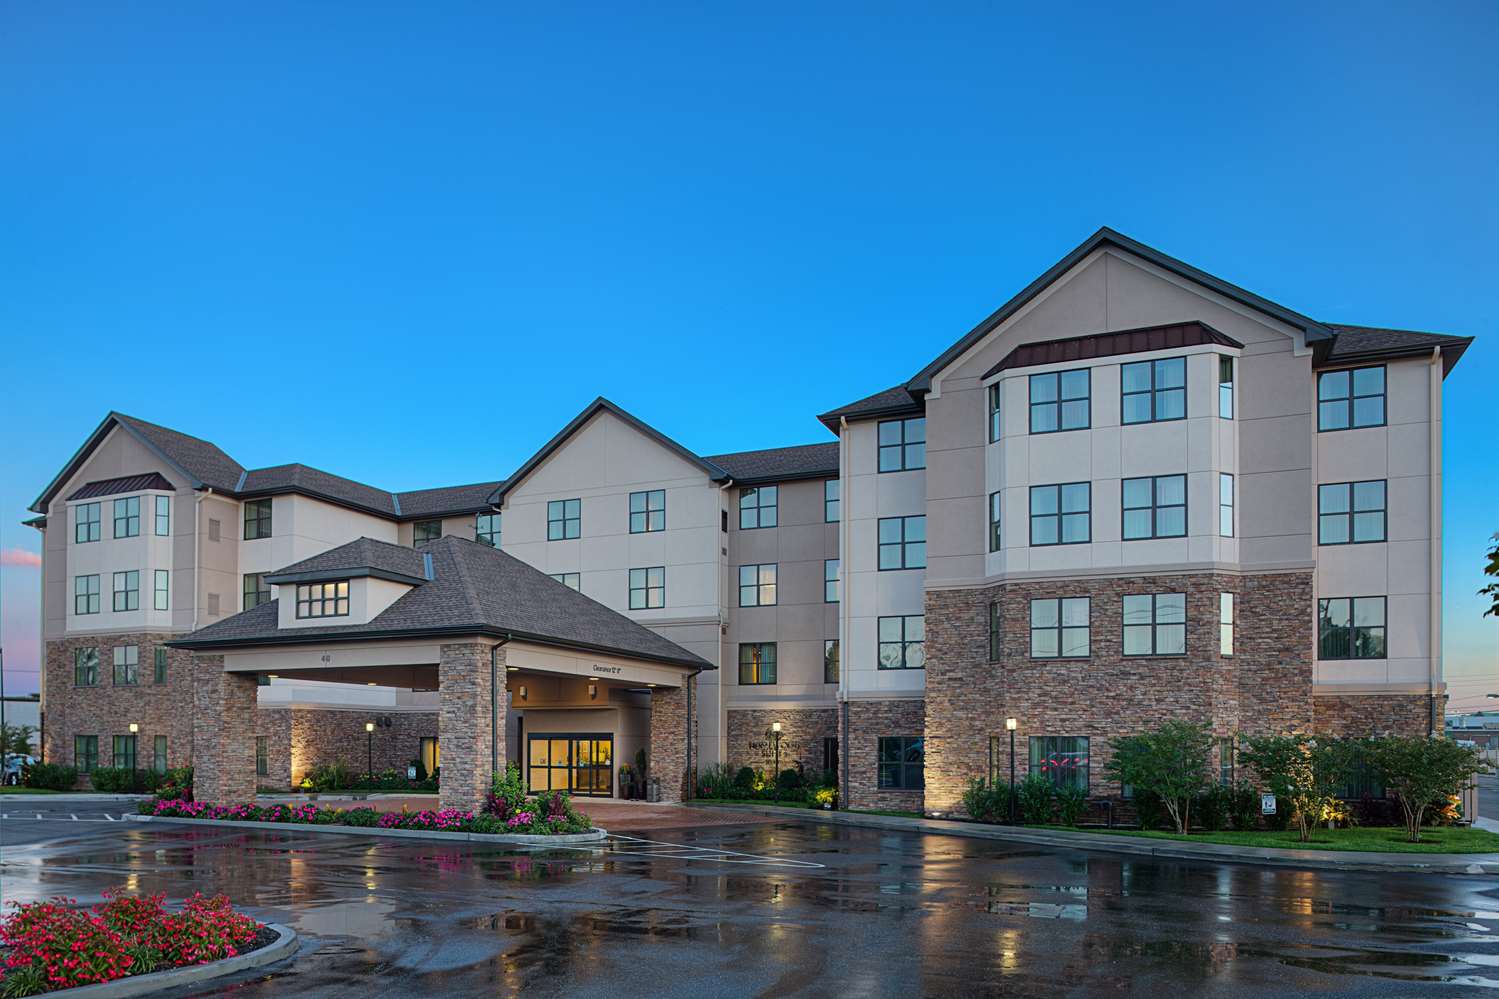 Pet Friendly Homewood Suites by Hilton Carle Place/Westbury, NY in Carle Place, New York